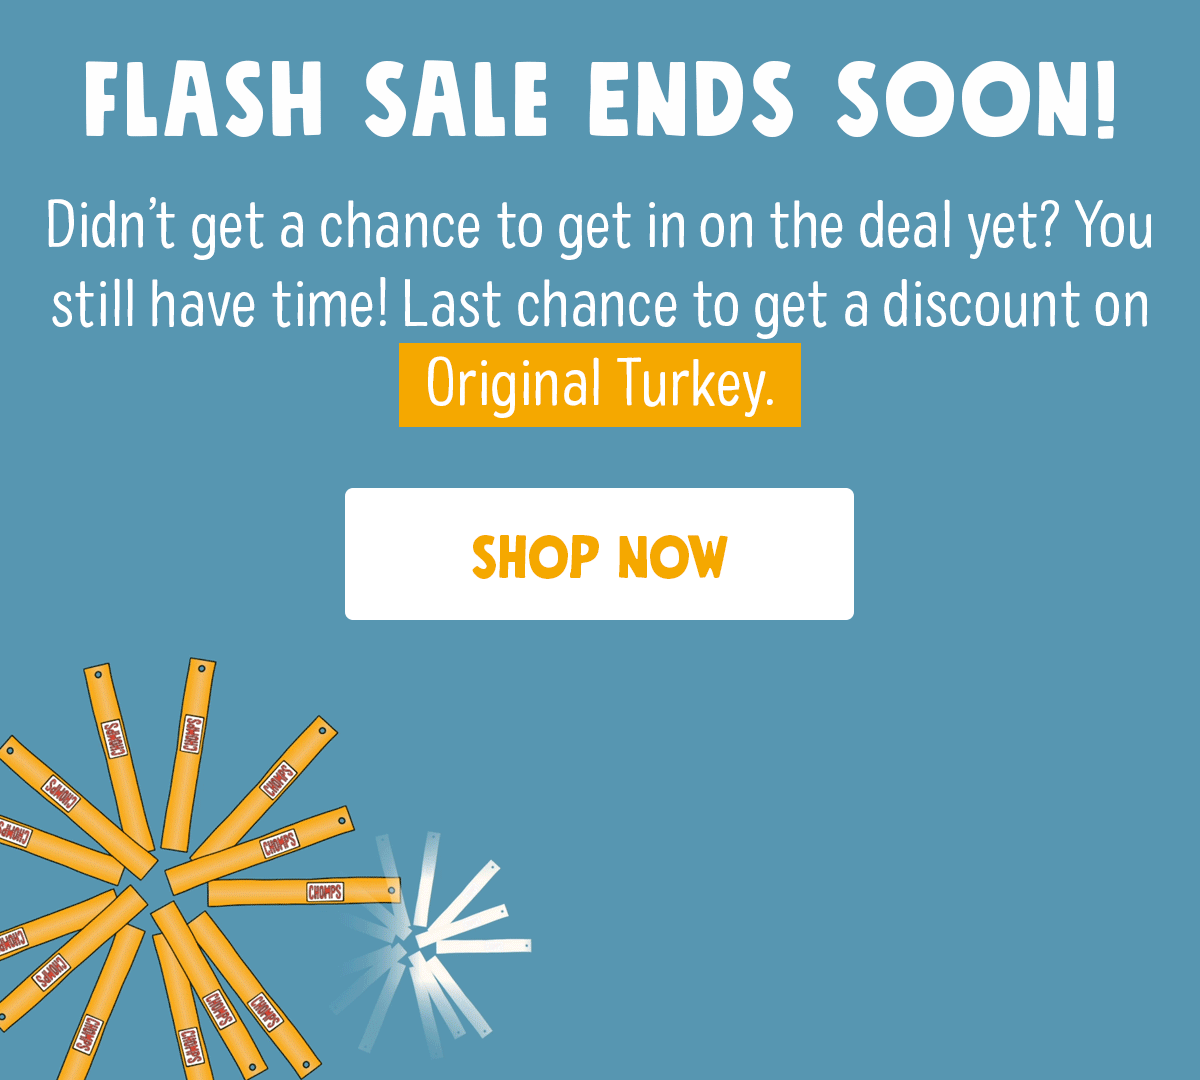 Don't Miss Out - Last Few Hours of Our Flash Sale!  Didn't get a chance to get in on the deal yet? You still have time! Get a discount on Chomps Original Turkey